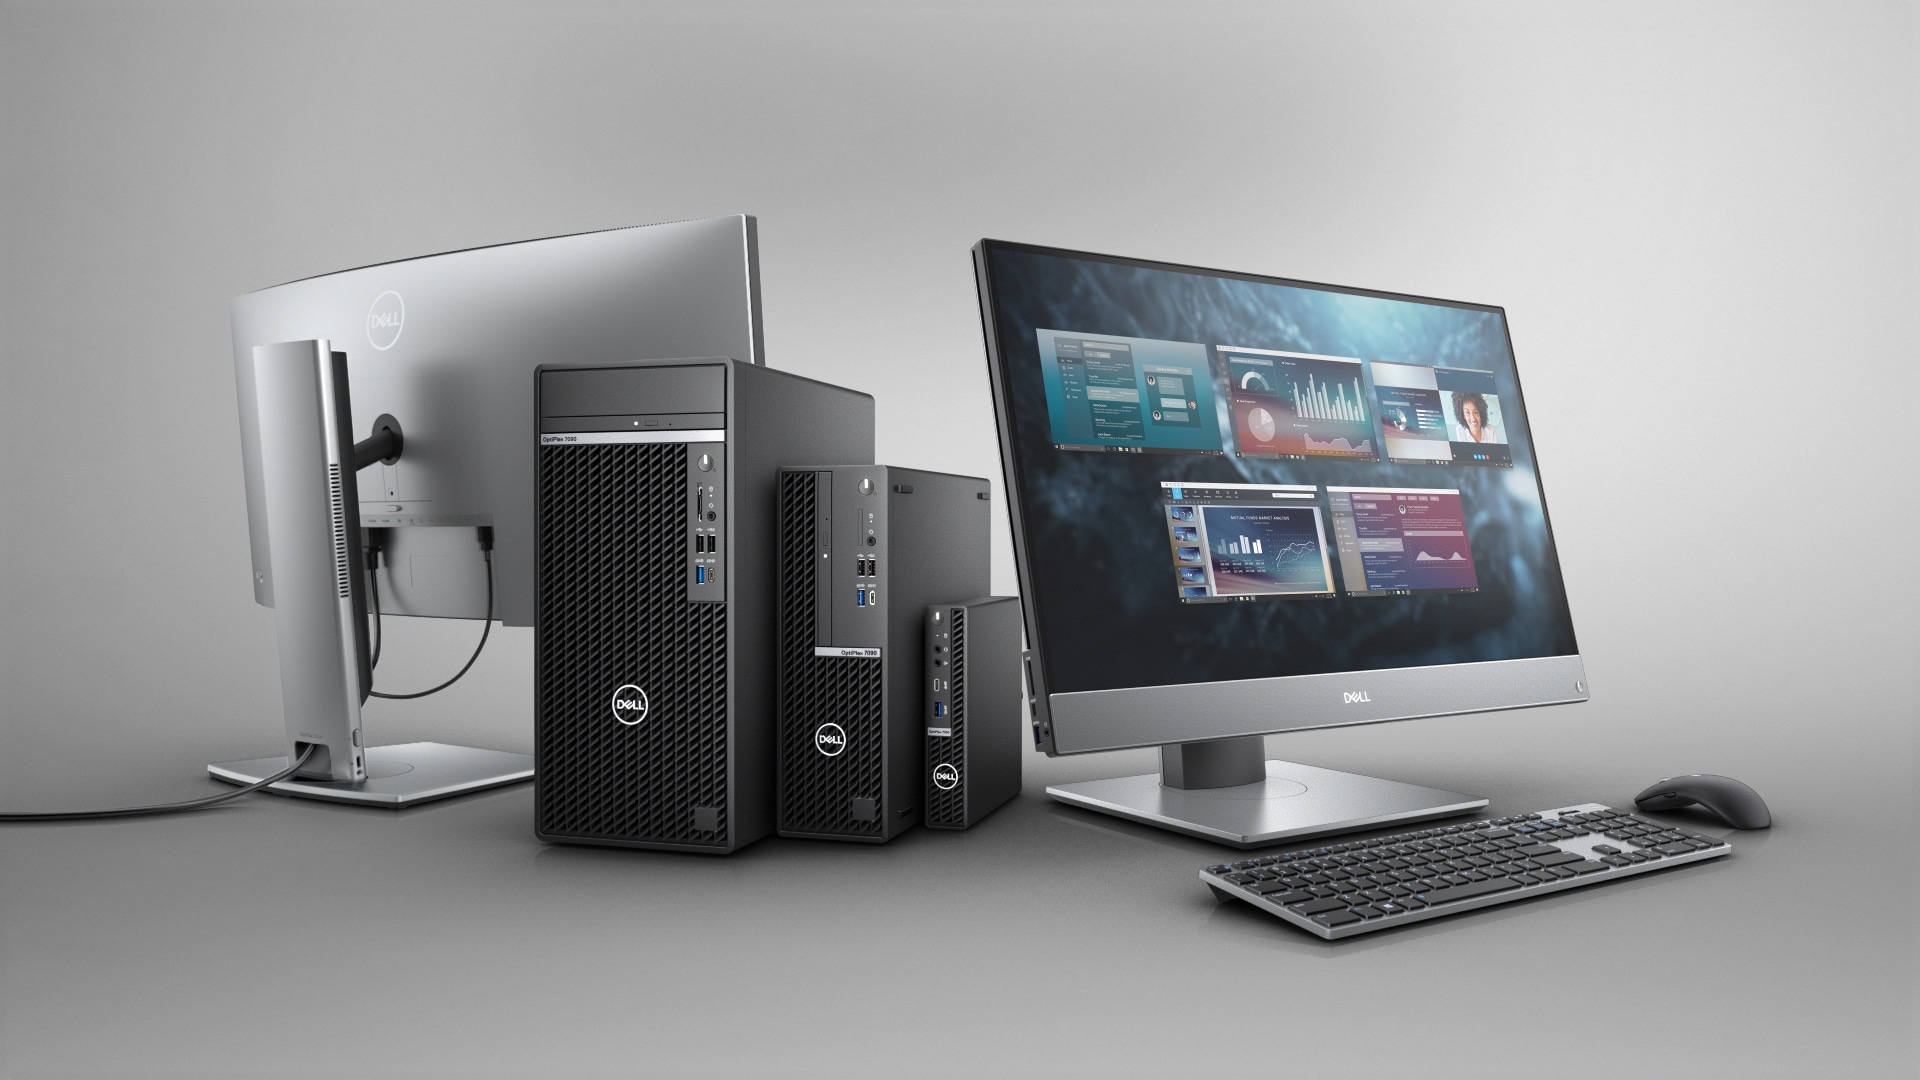 OptiPlex 7090 Tower and Small Form Factor | Dell USA